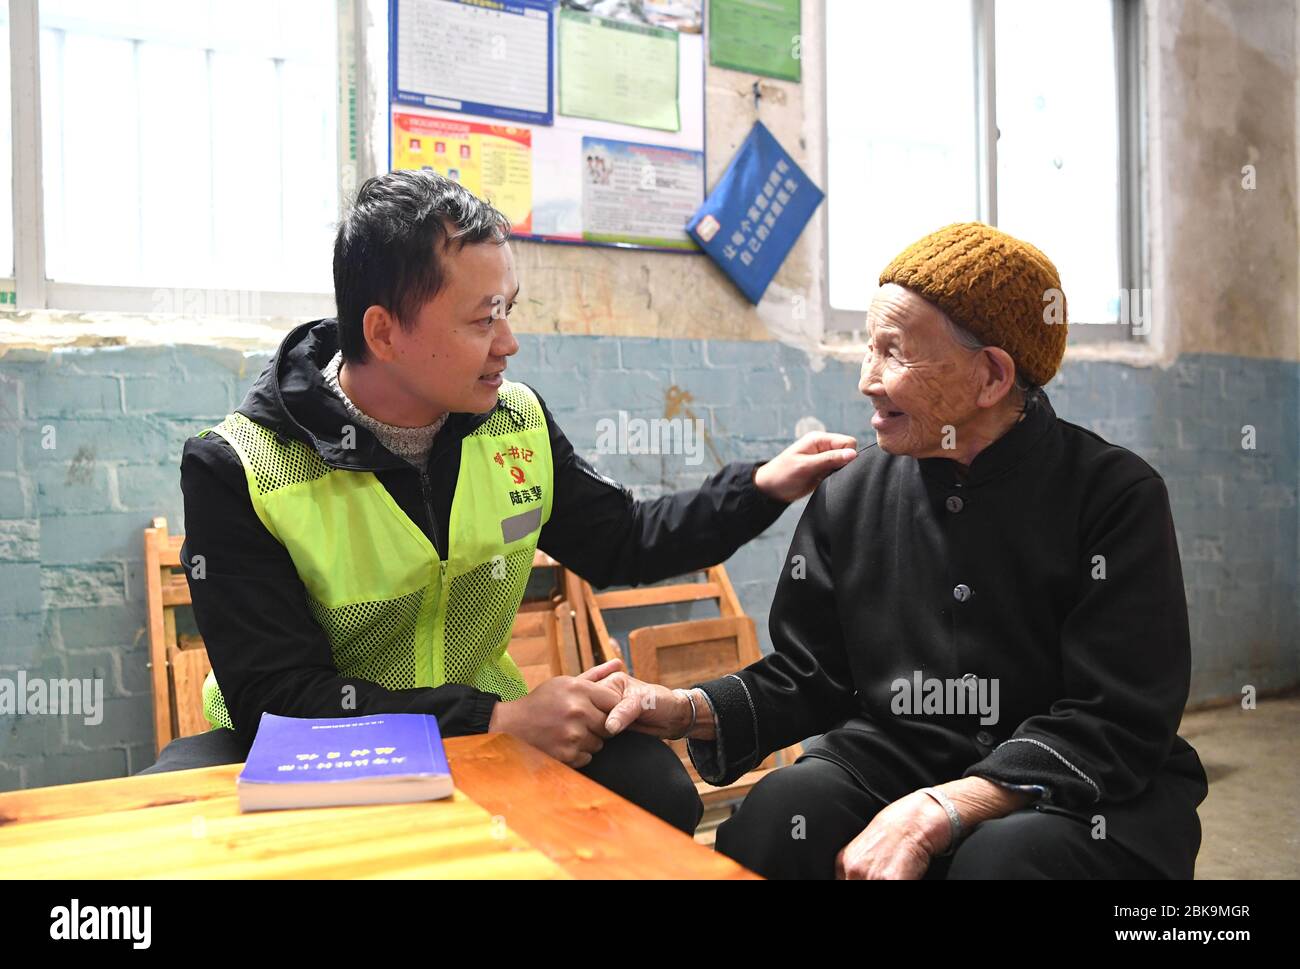 (200503) -- NANNING, May 3, 2020 (Xinhua) -- Lu Rongfei (L), a 32-year-old village official of Langming Village, talks with an elderly villager in Tiandeng County, south China's Guangxi Zhuang Autonomous Region, April 22, 2020. In Guangxi, many young people are entrusted with the task of strengthening the Communist Party of China (CPC) at the grassroots level and aiding in poverty alleviation. They are working on the poverty relief front: going door to door to find about people's livelihood and coming up with ideas to help them shake off poverty. The youth of today shine in the course of Stock Photo